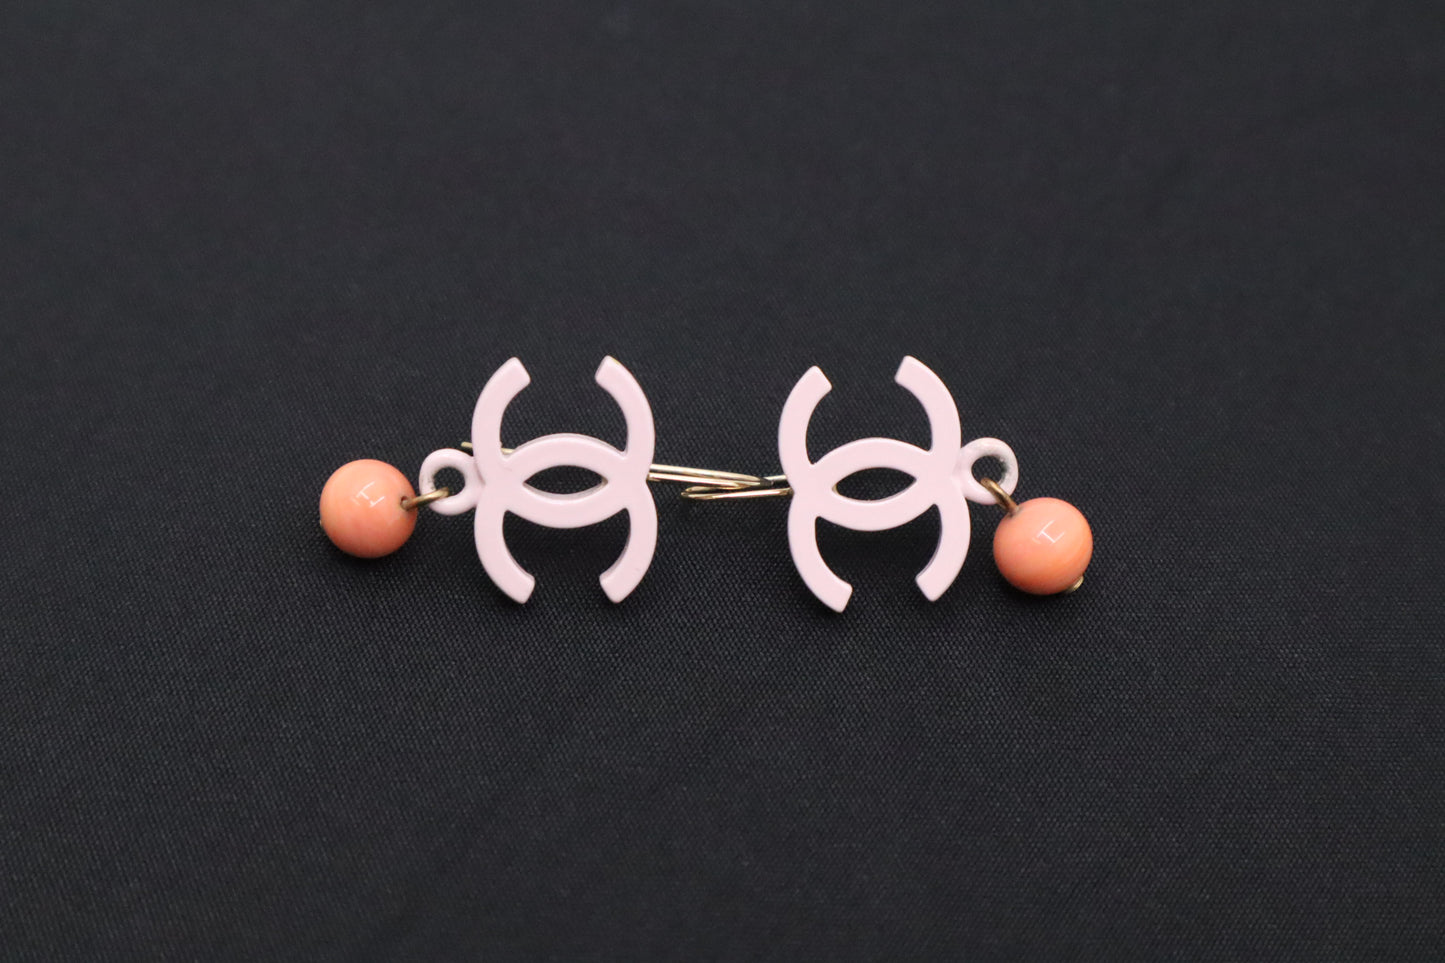 Chanel Earrings in Pink and Peach